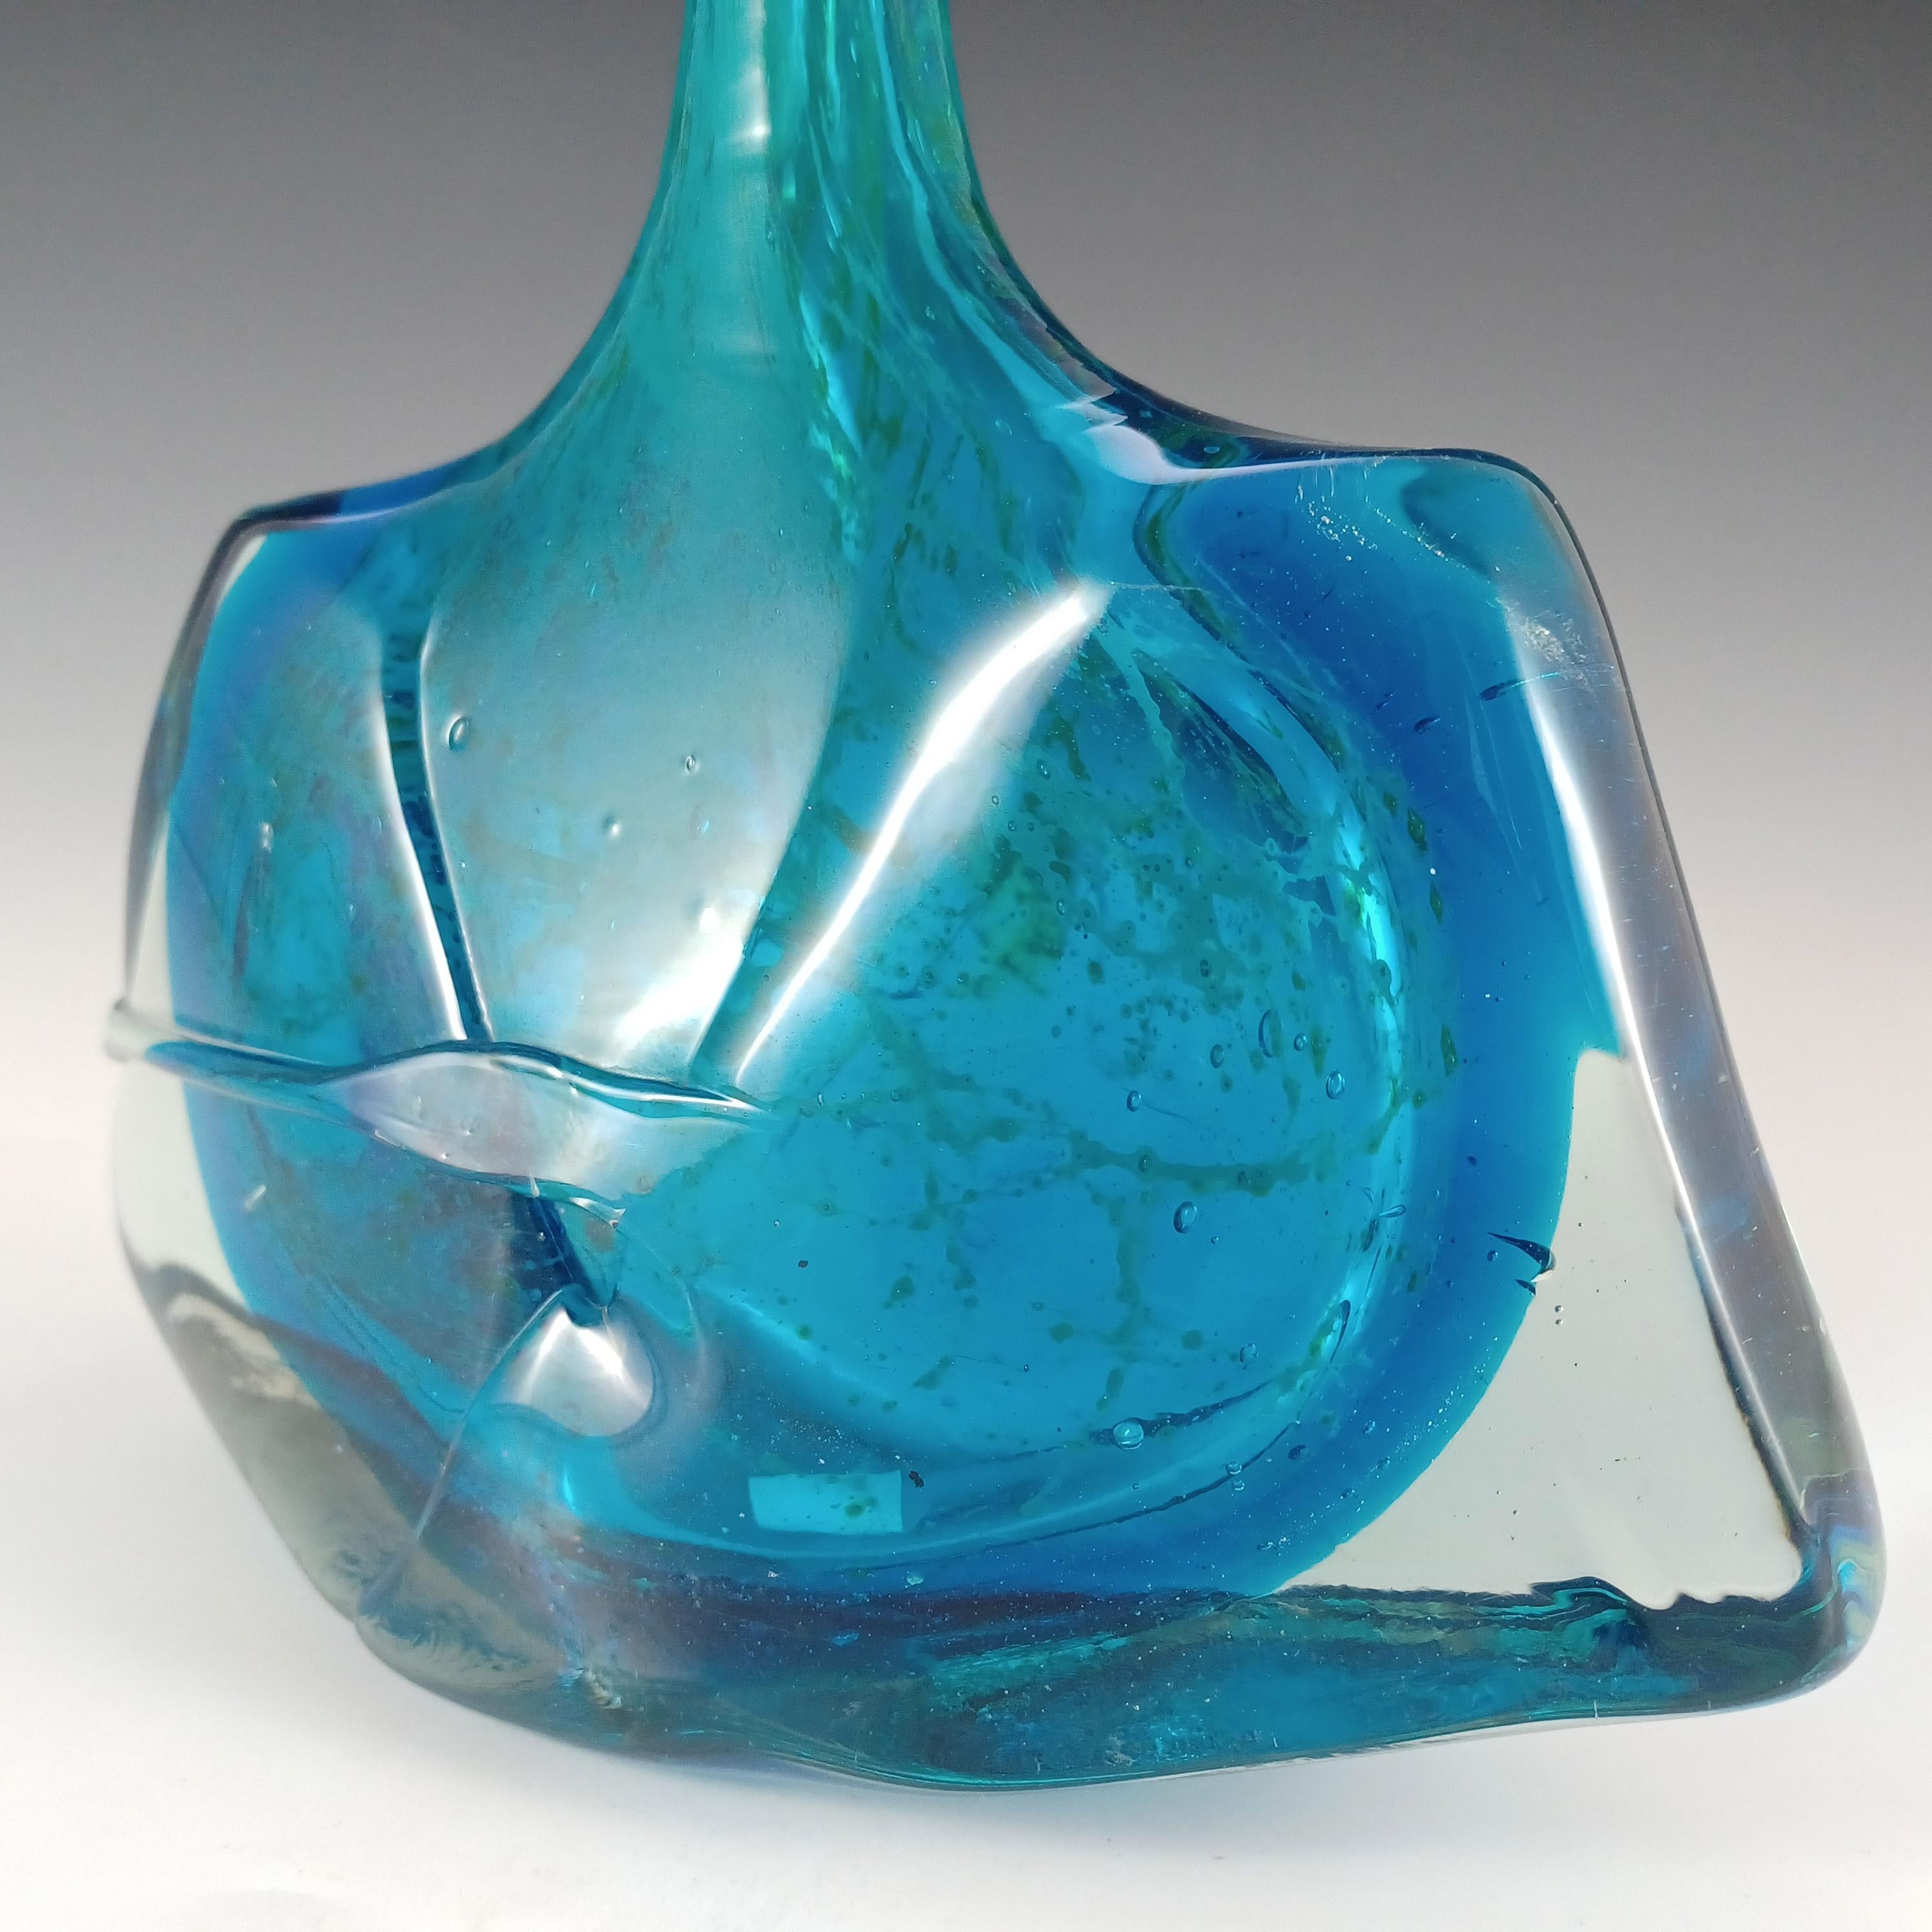 Mdina Maltese Blue Glass 'Fish' / 'Axe Head' Vase - Signed 1979 In Good Condition For Sale In Bolton, GB